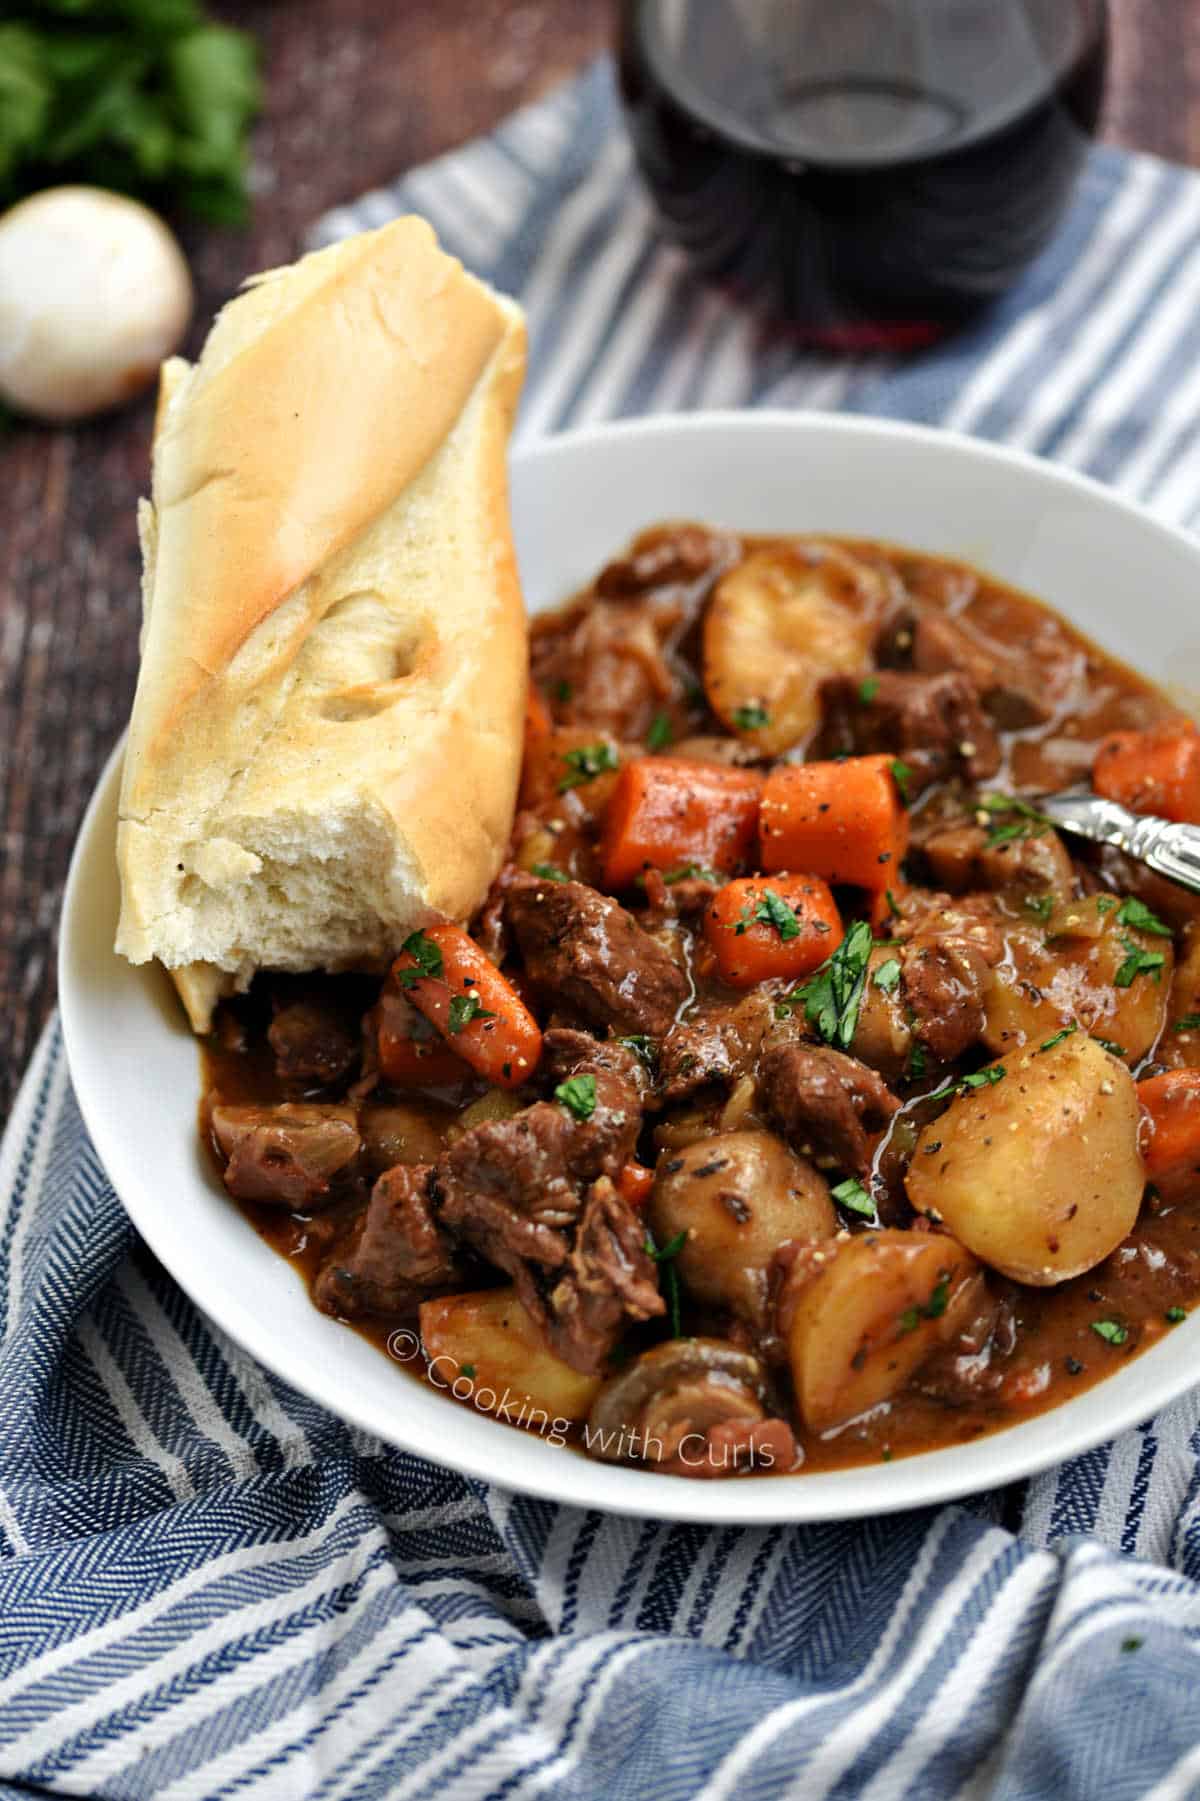 Instant Pot Beef Bourguignon in a bowl with crusty bread and glass of red wine in the background.